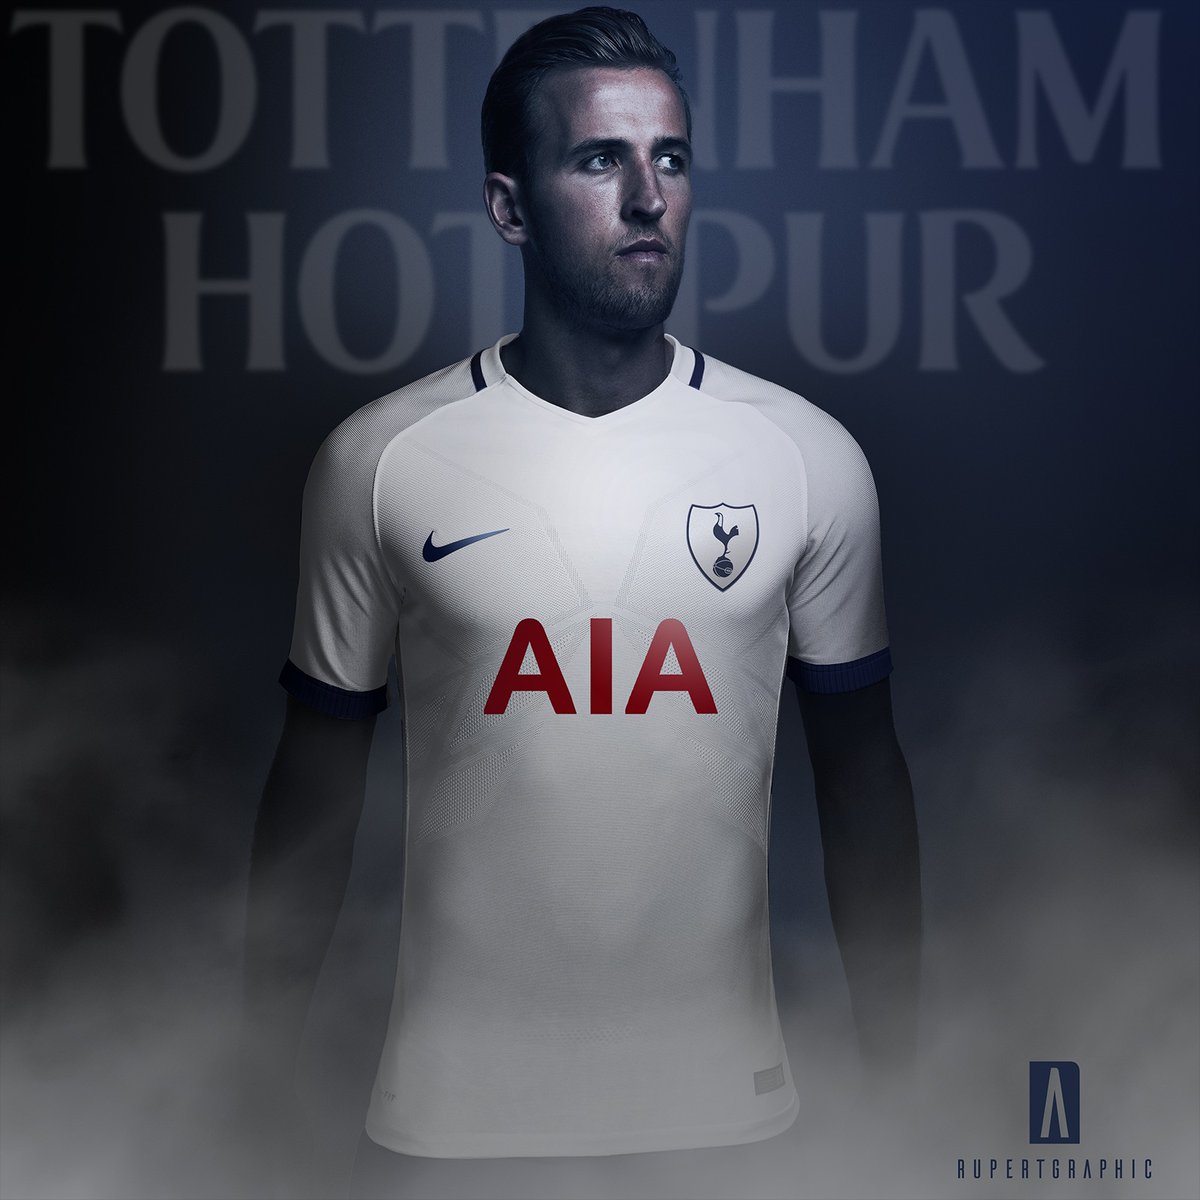 Camisetas Temporada 2017/18 Here-is-how-the-new-nike-tottenham-17-18-kit-could-look-like%2B%25282%2529